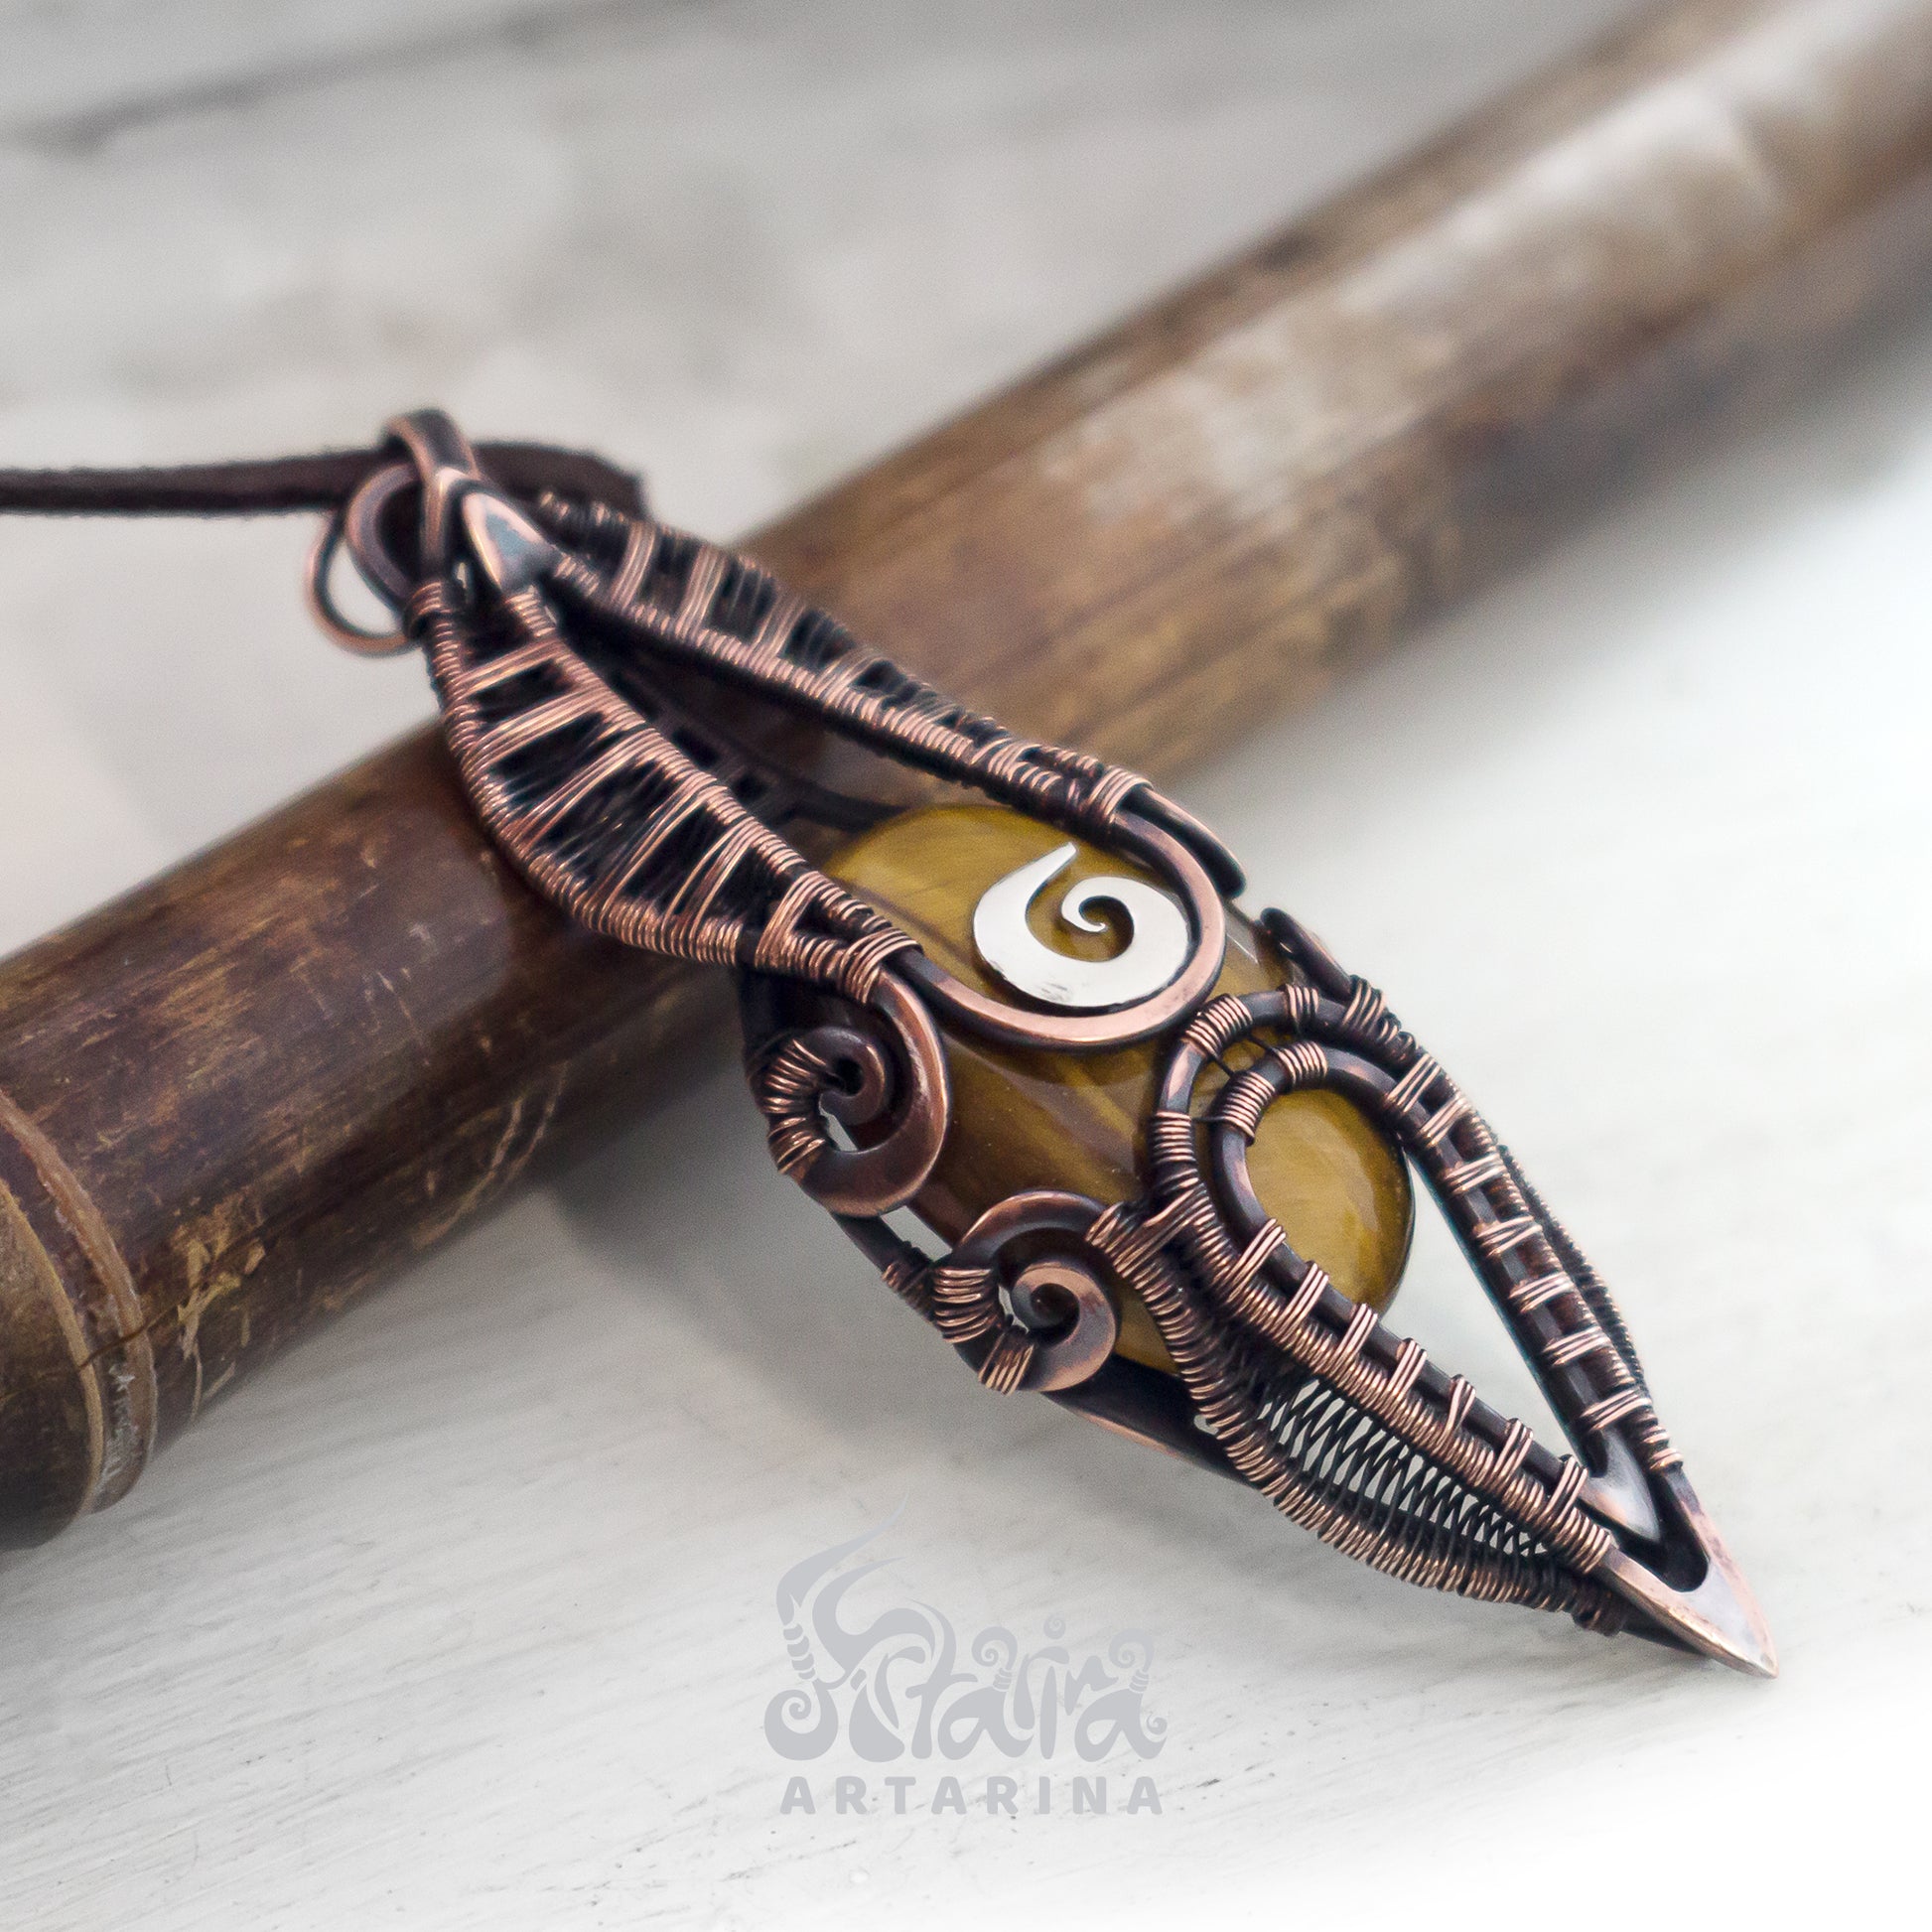 Handmade copper wire-wrapped necklace with a unique Tiger's Eye stone pendant pic 3